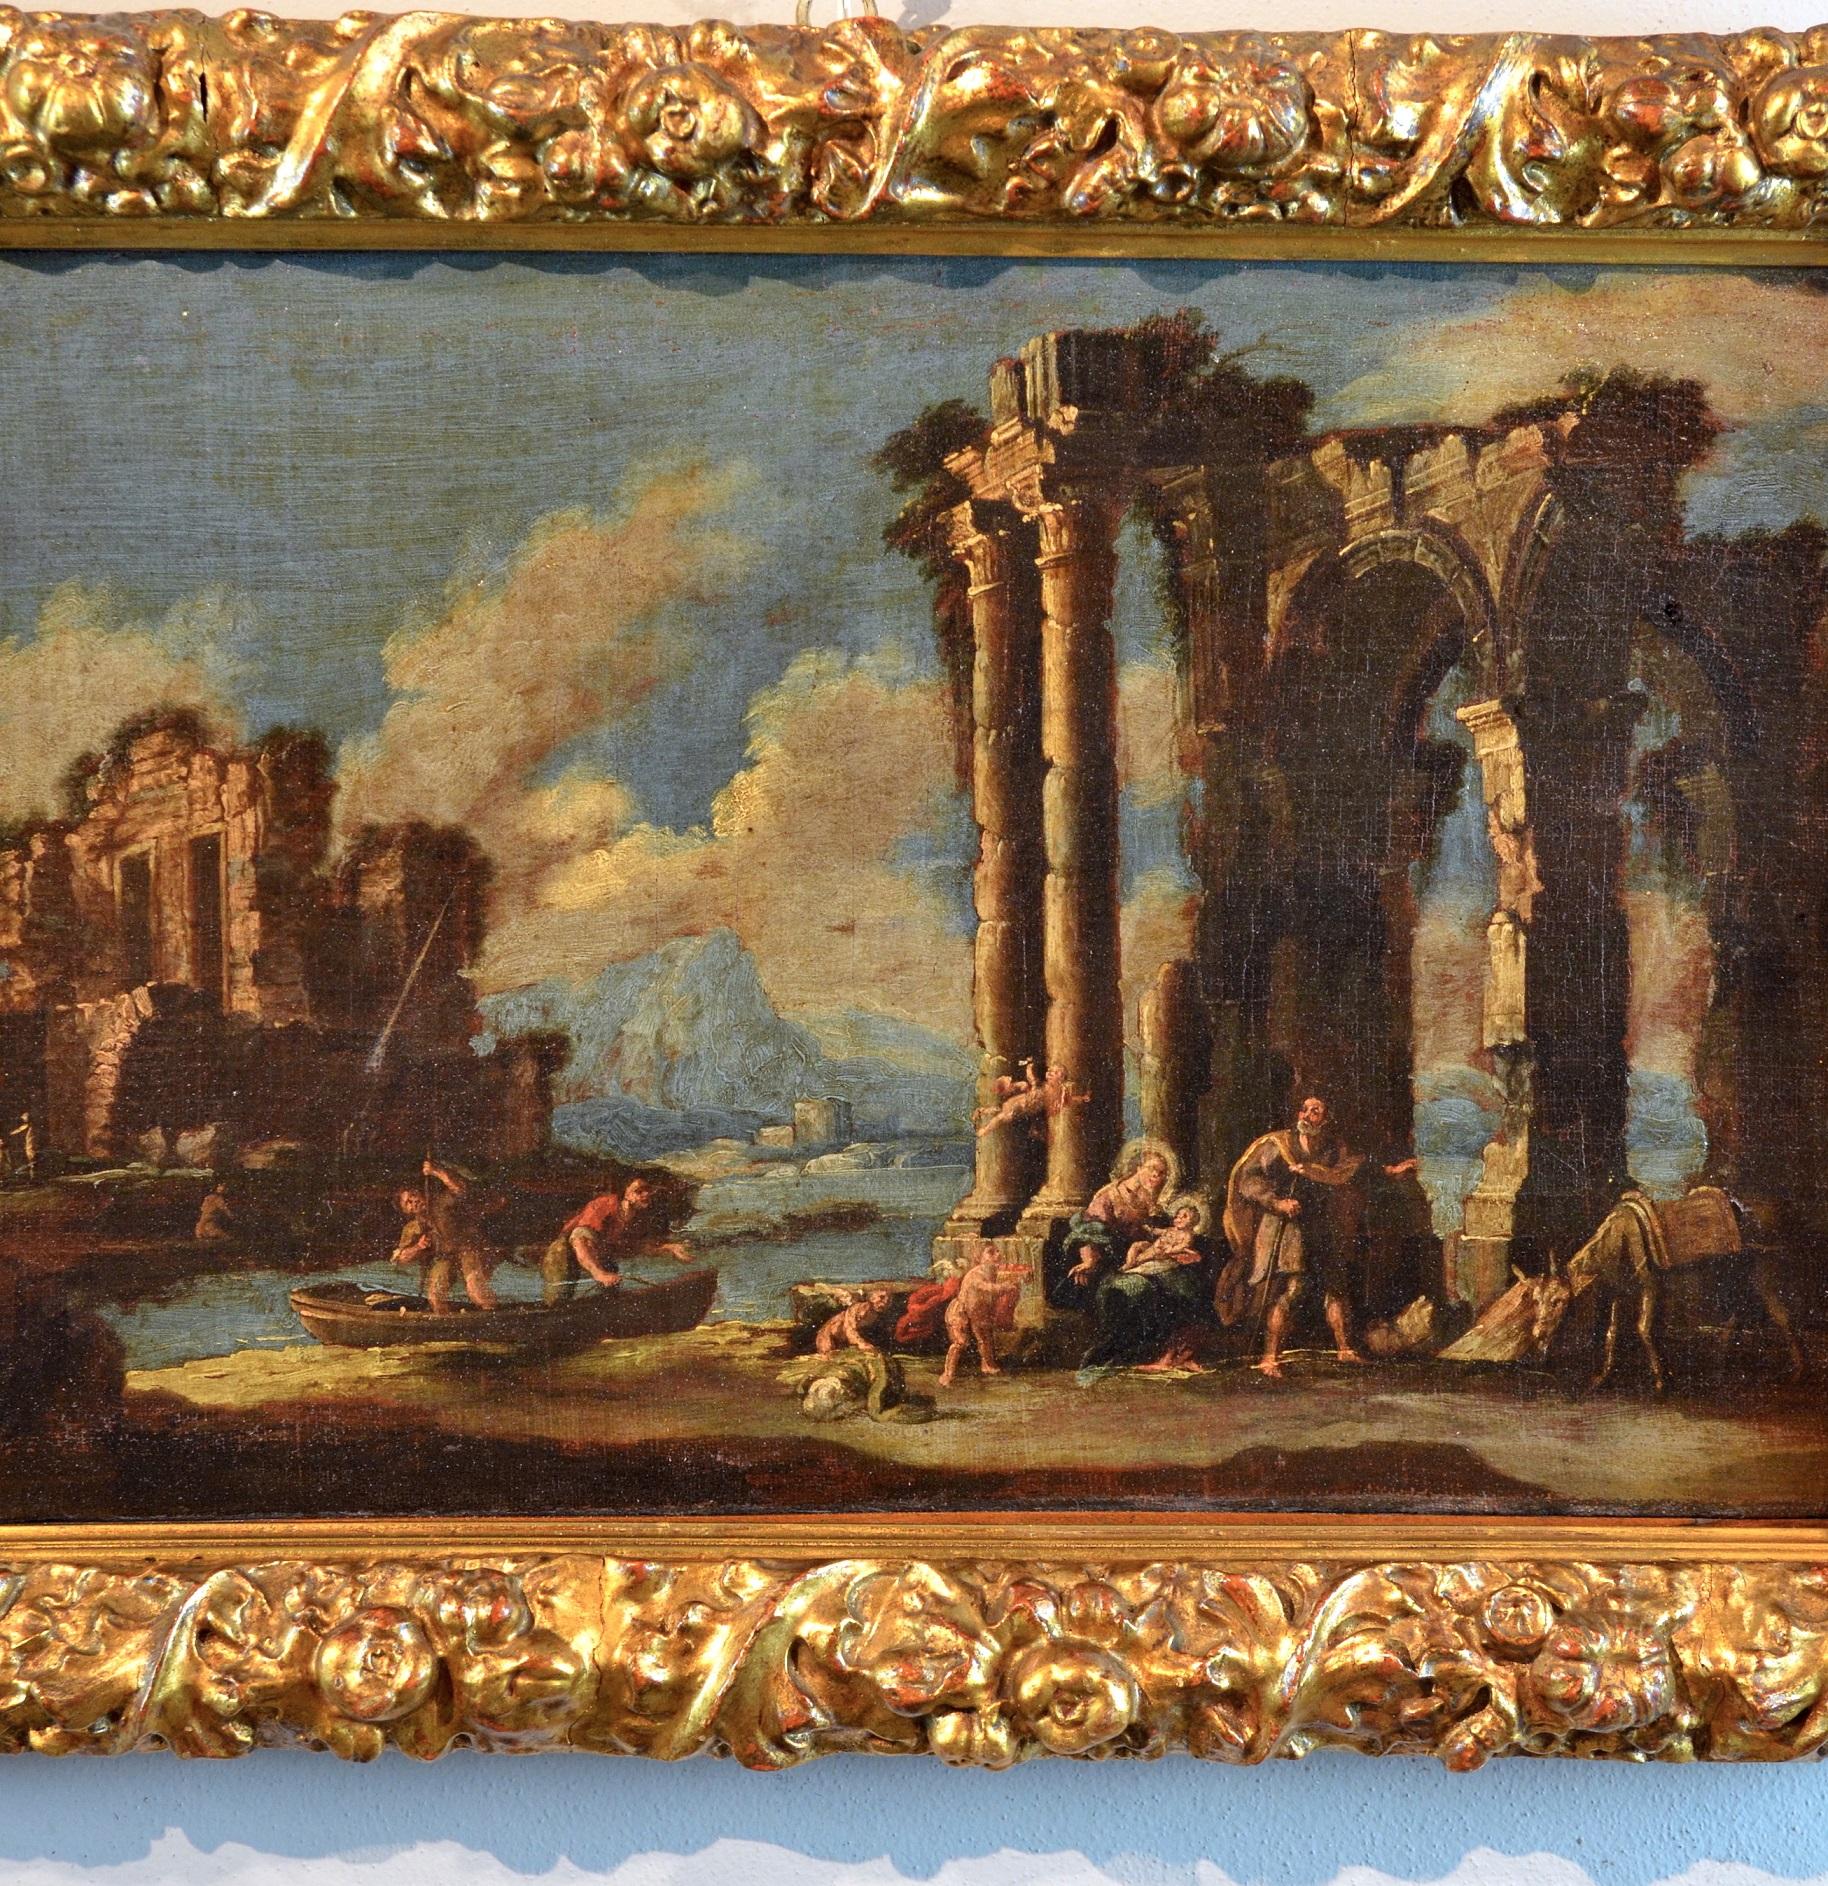 Nicola Viso
(active in Naples in the first half of the 18th century)
Architectural capriccio with temple in ruins and scene of the rest of the Holy Family

Neapolitan school of the eighteenth century
oil on canvas, 38 x 64 cm
With a valuable period